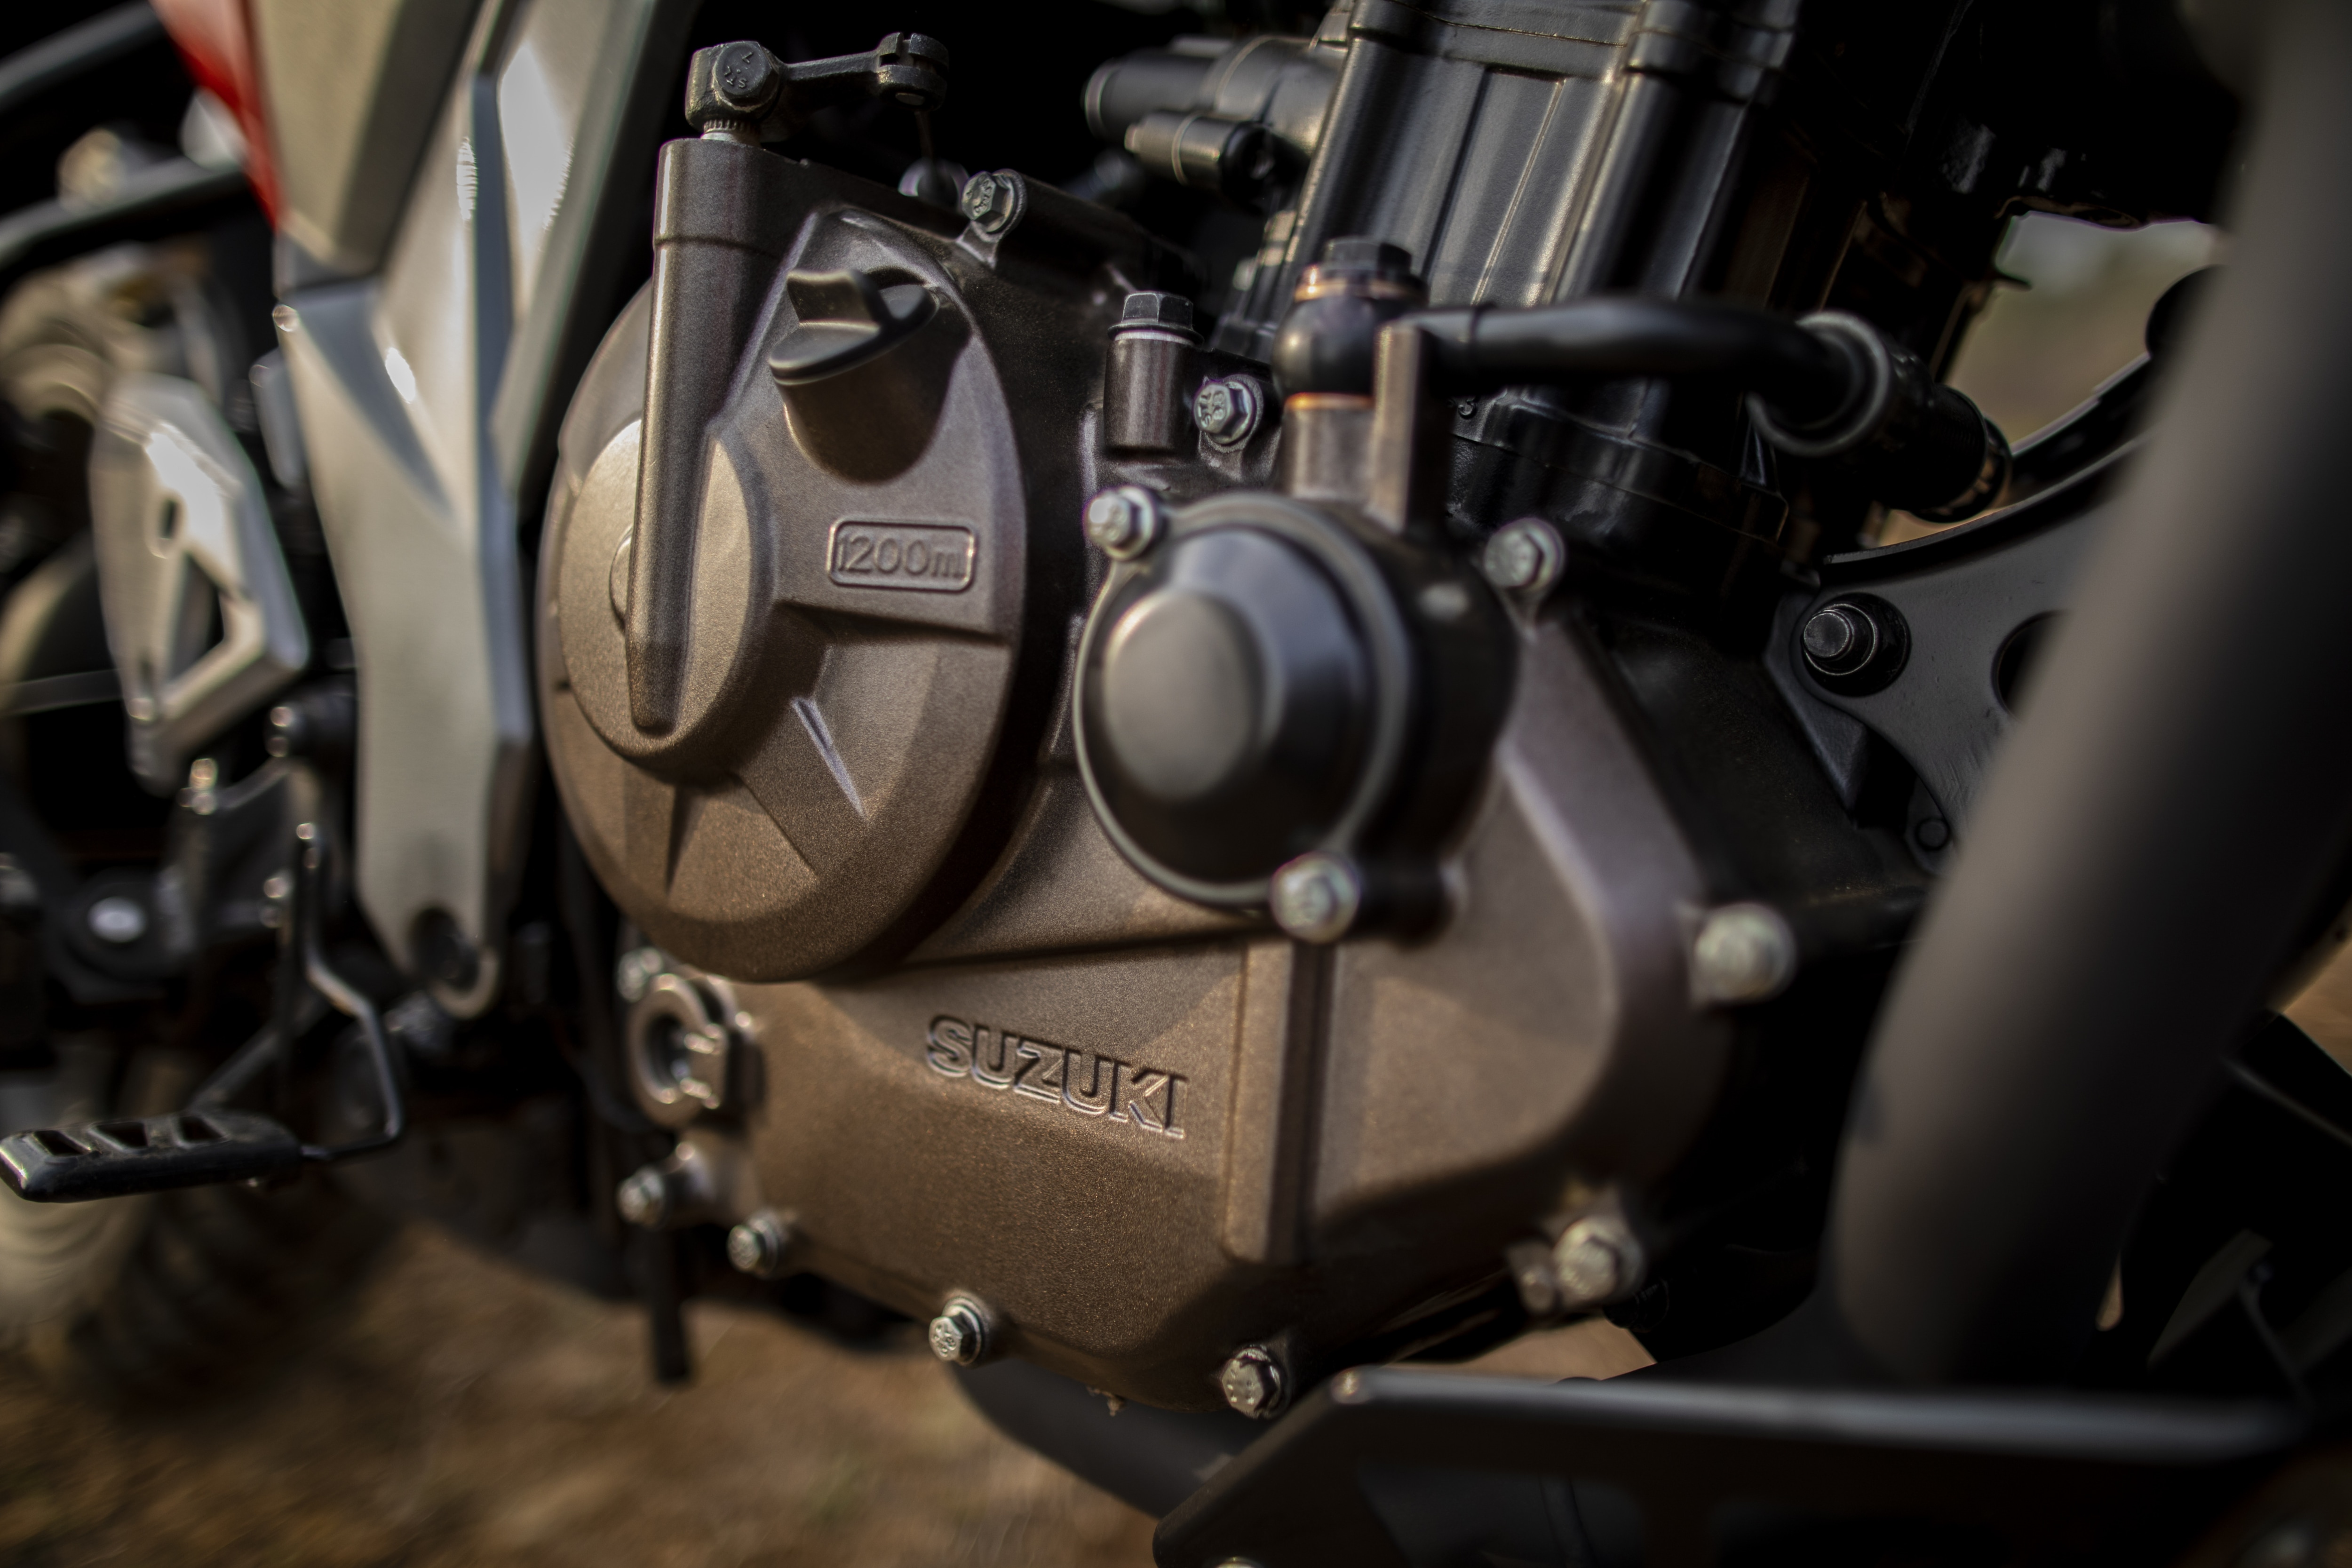 Suzuki V-Strom SX ends up using the exact same engine which is a 249 cc 4-stroke single-cyl oil-cooled engine as the Gixxer 250 Twins.